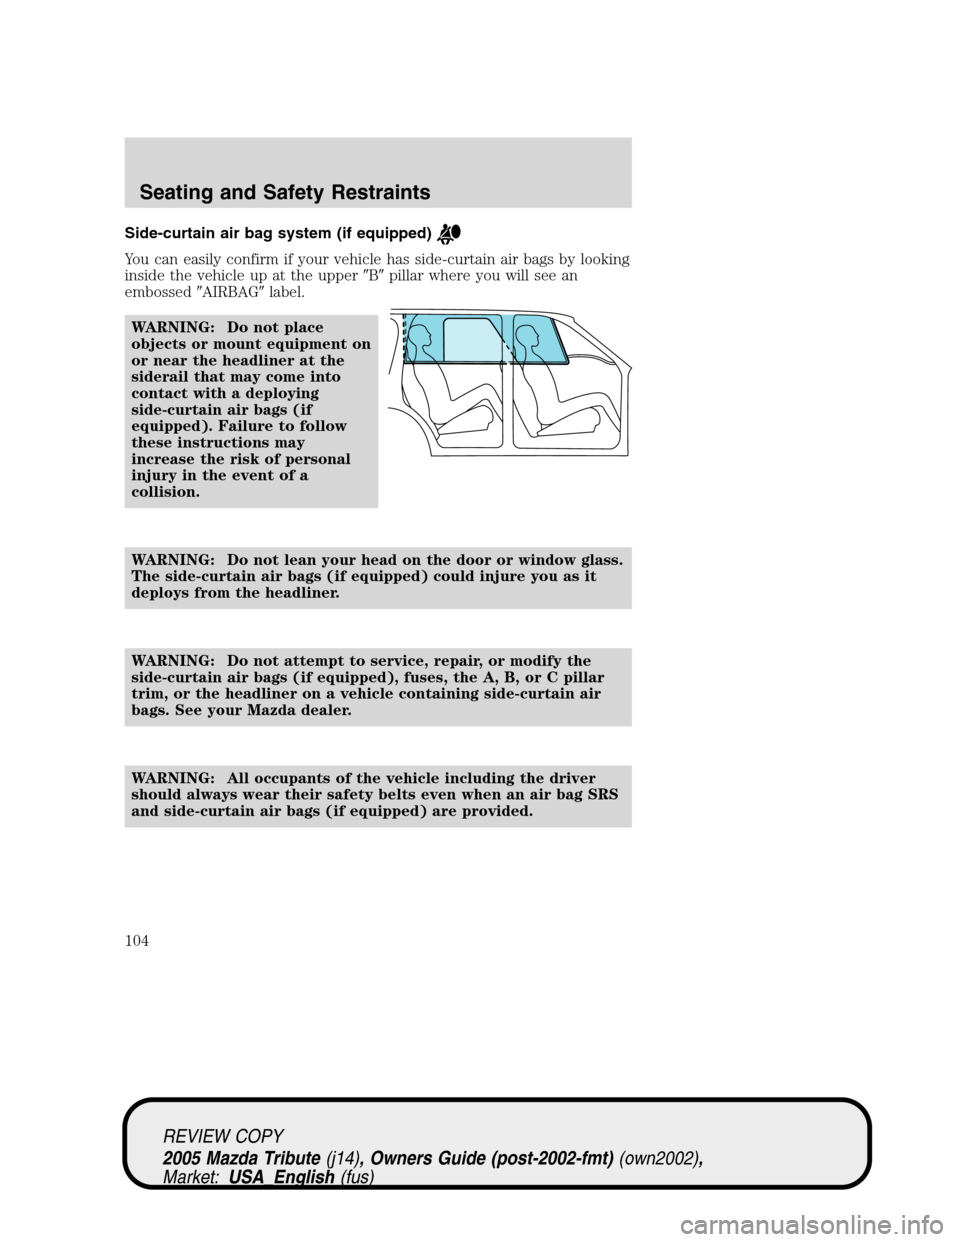 MAZDA MODEL TRIBUTE 2005  Owners Manual (in English) Side-curtain air bag system (if equipped)
You can easily confirm if your vehicle has side-curtain air bags by looking
inside the vehicle up at the upperBpillar where you will see an
embossedAIRBAG